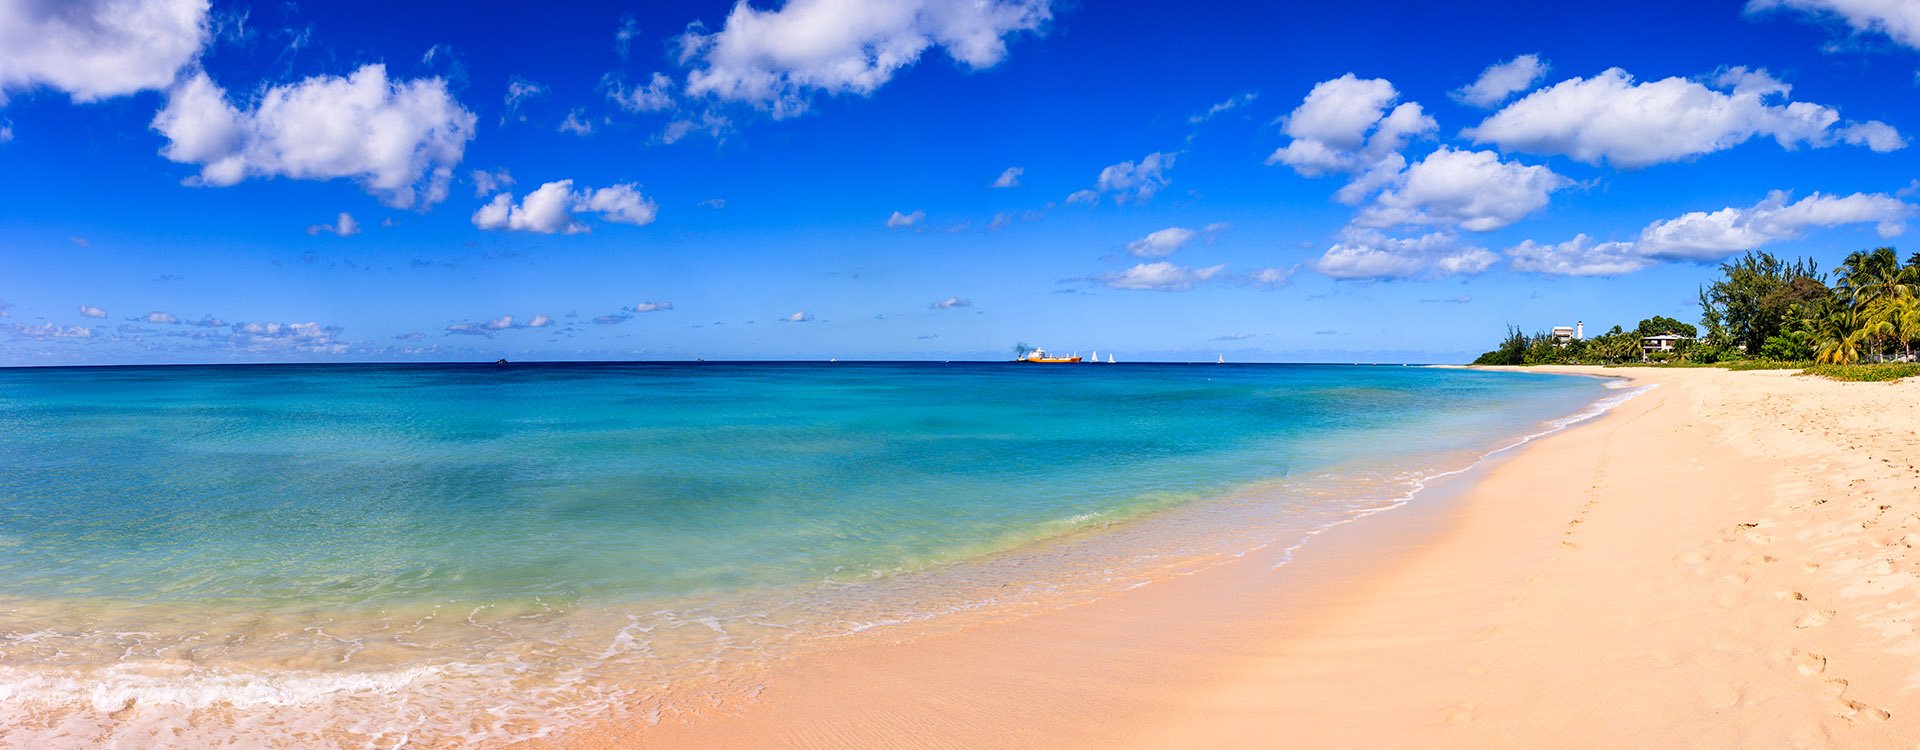 Barbados Island beach, Caribbean. Beach line, white sand, clear turquoise water with small waves and a sunny blue sky